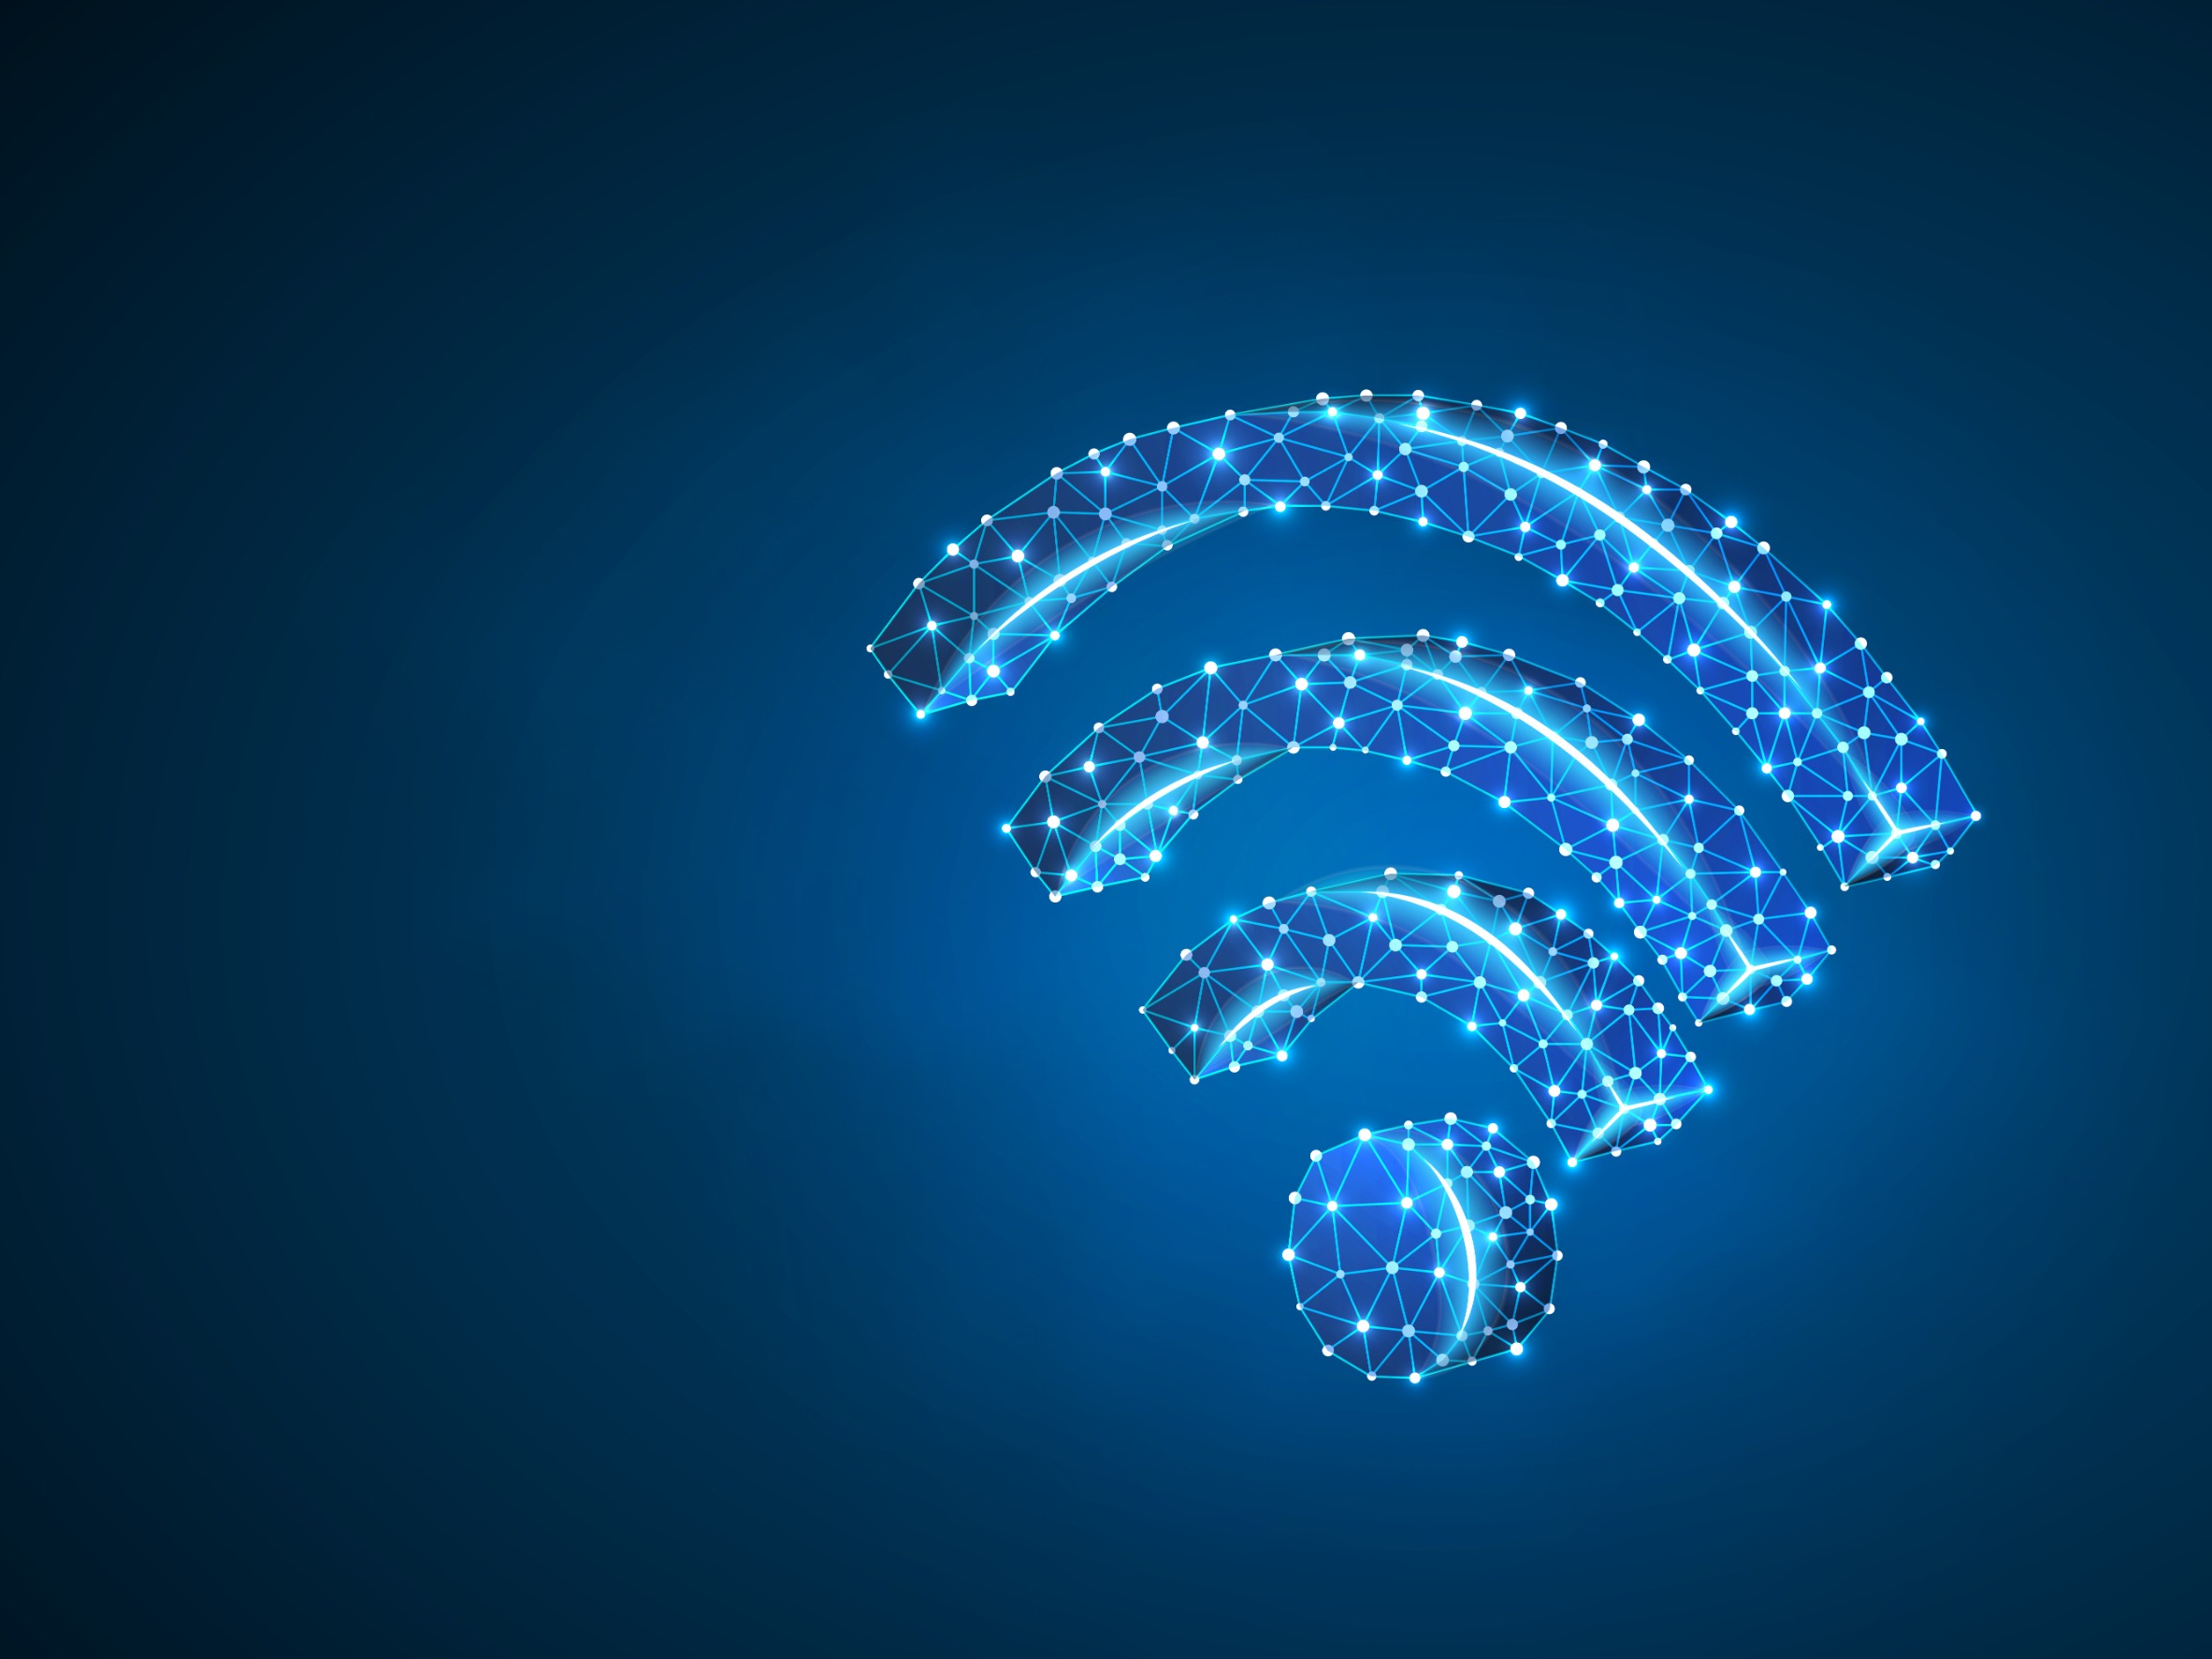 Wi-Fi 6E trials claim to show what a good idea wifi over 6 GHz band is